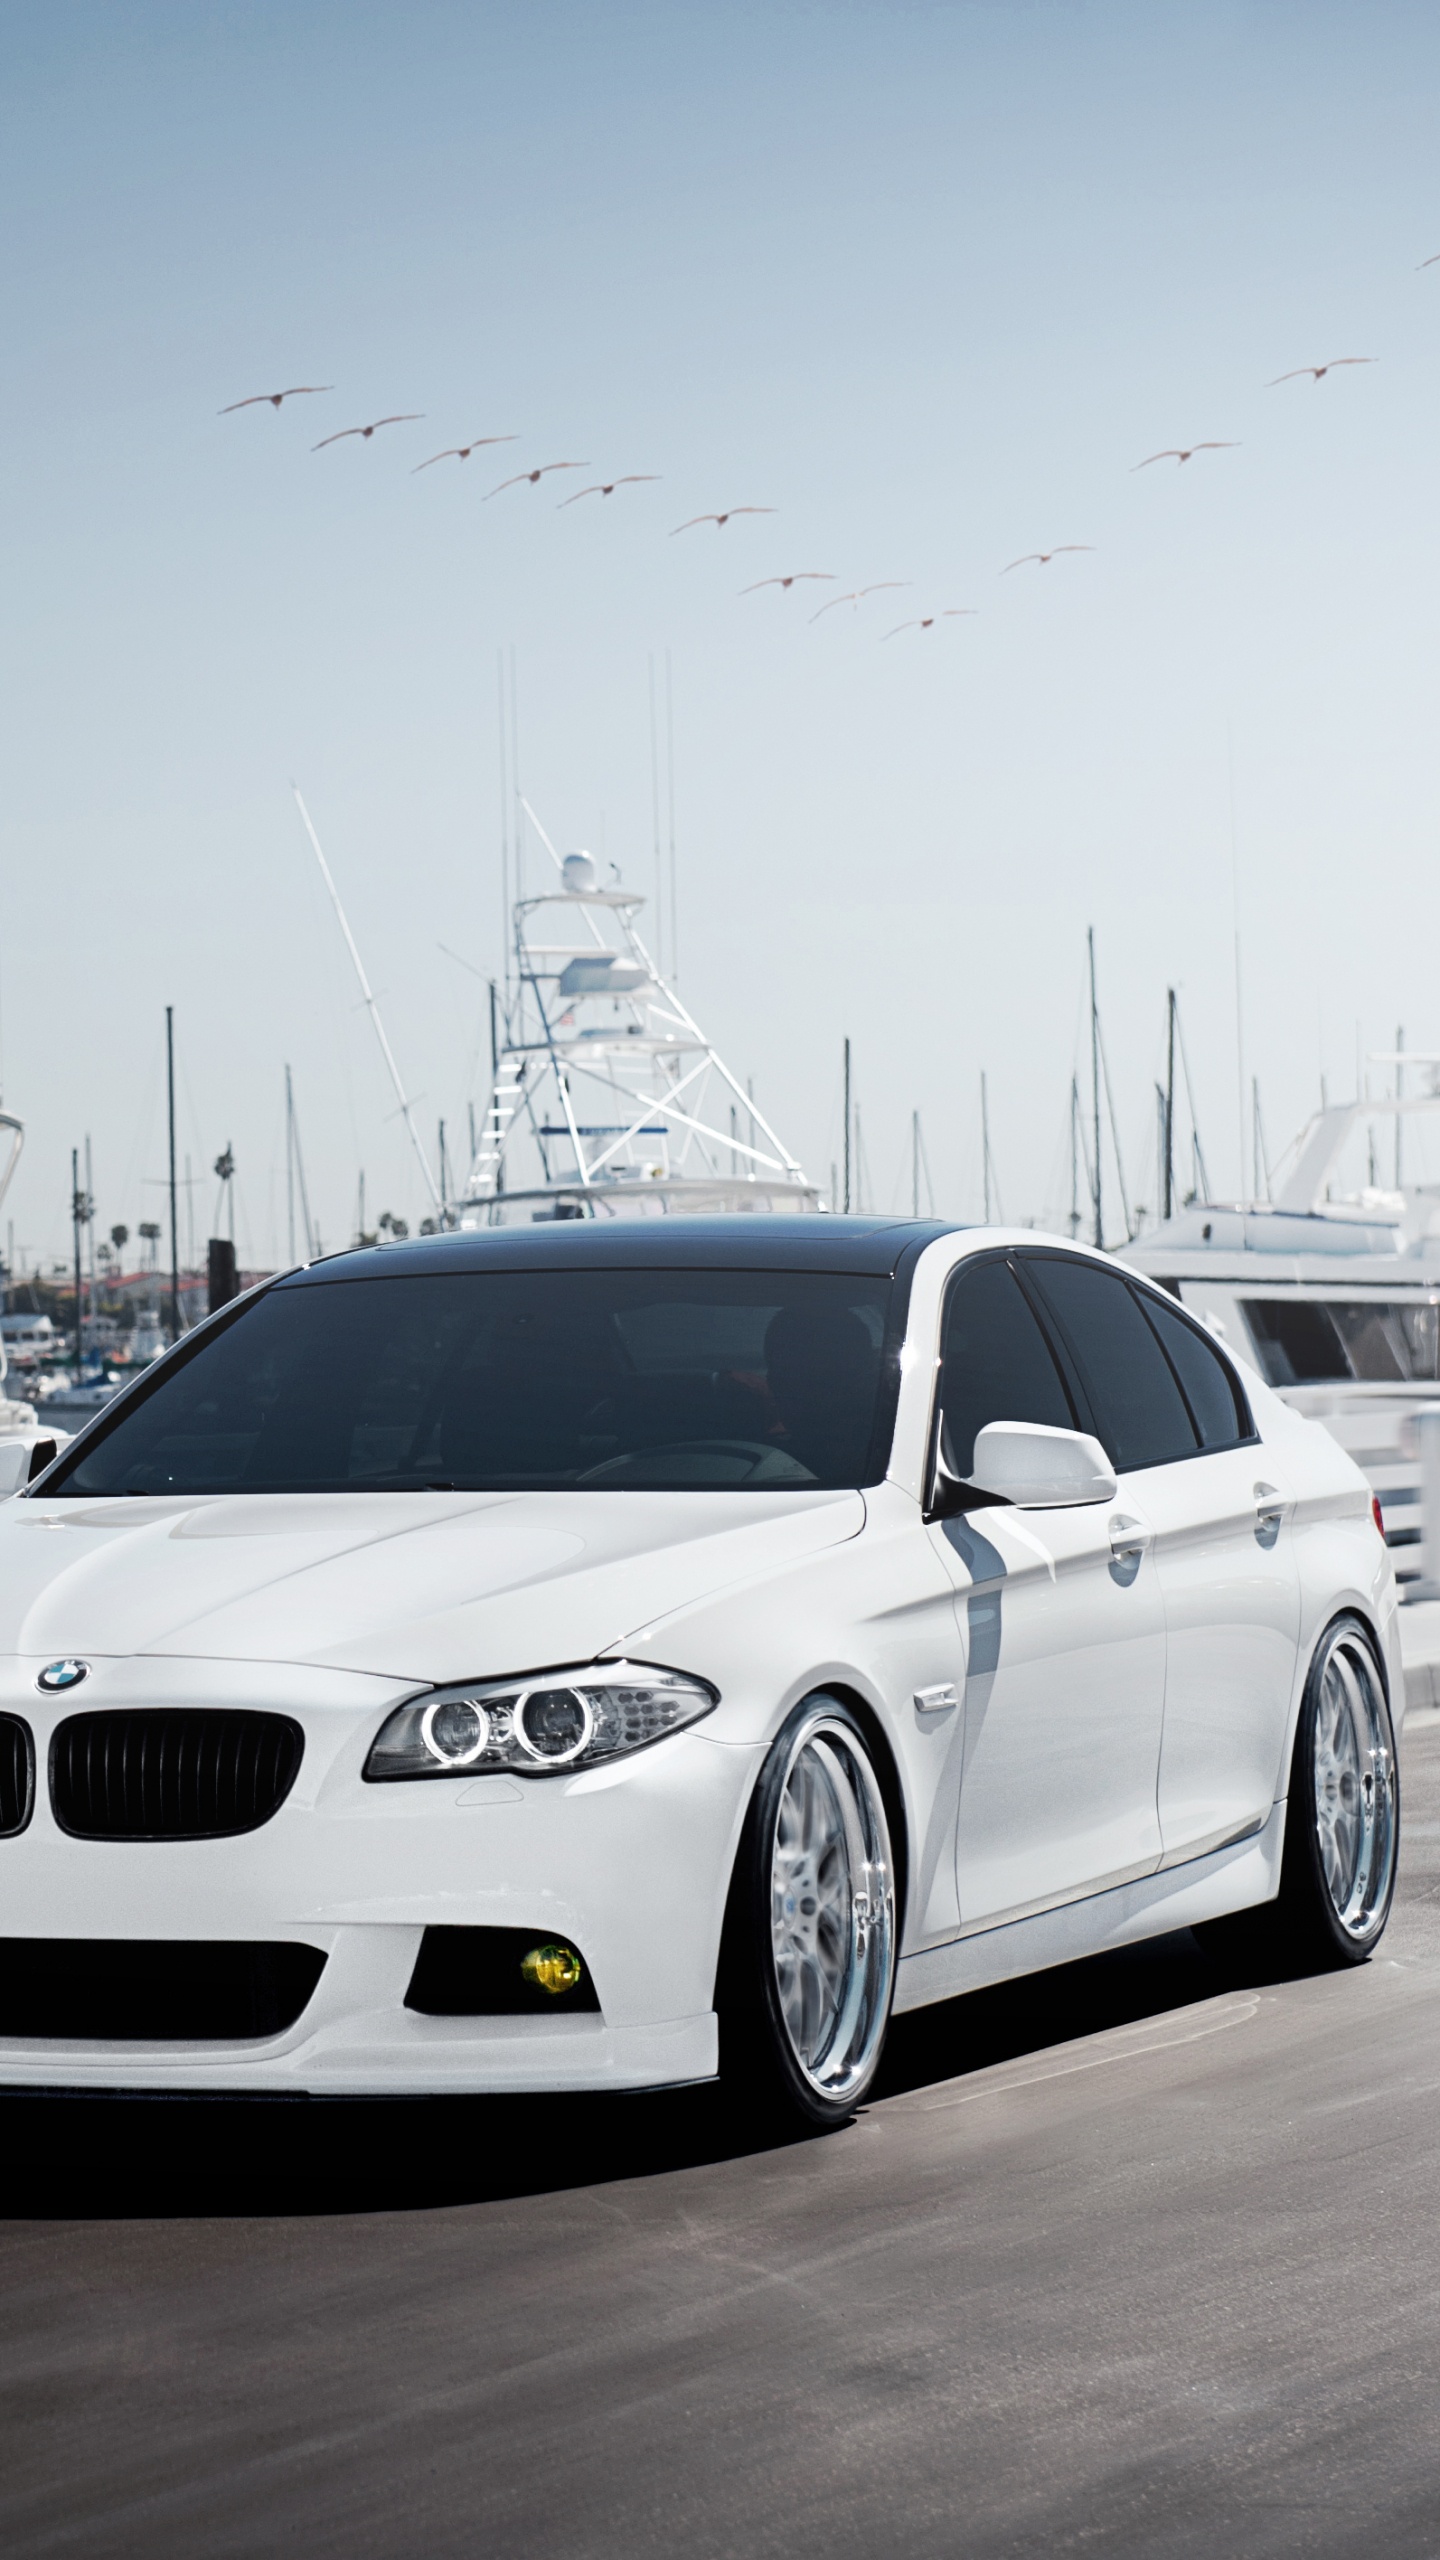 White Bmw m 3 on Road During Daytime. Wallpaper in 1440x2560 Resolution